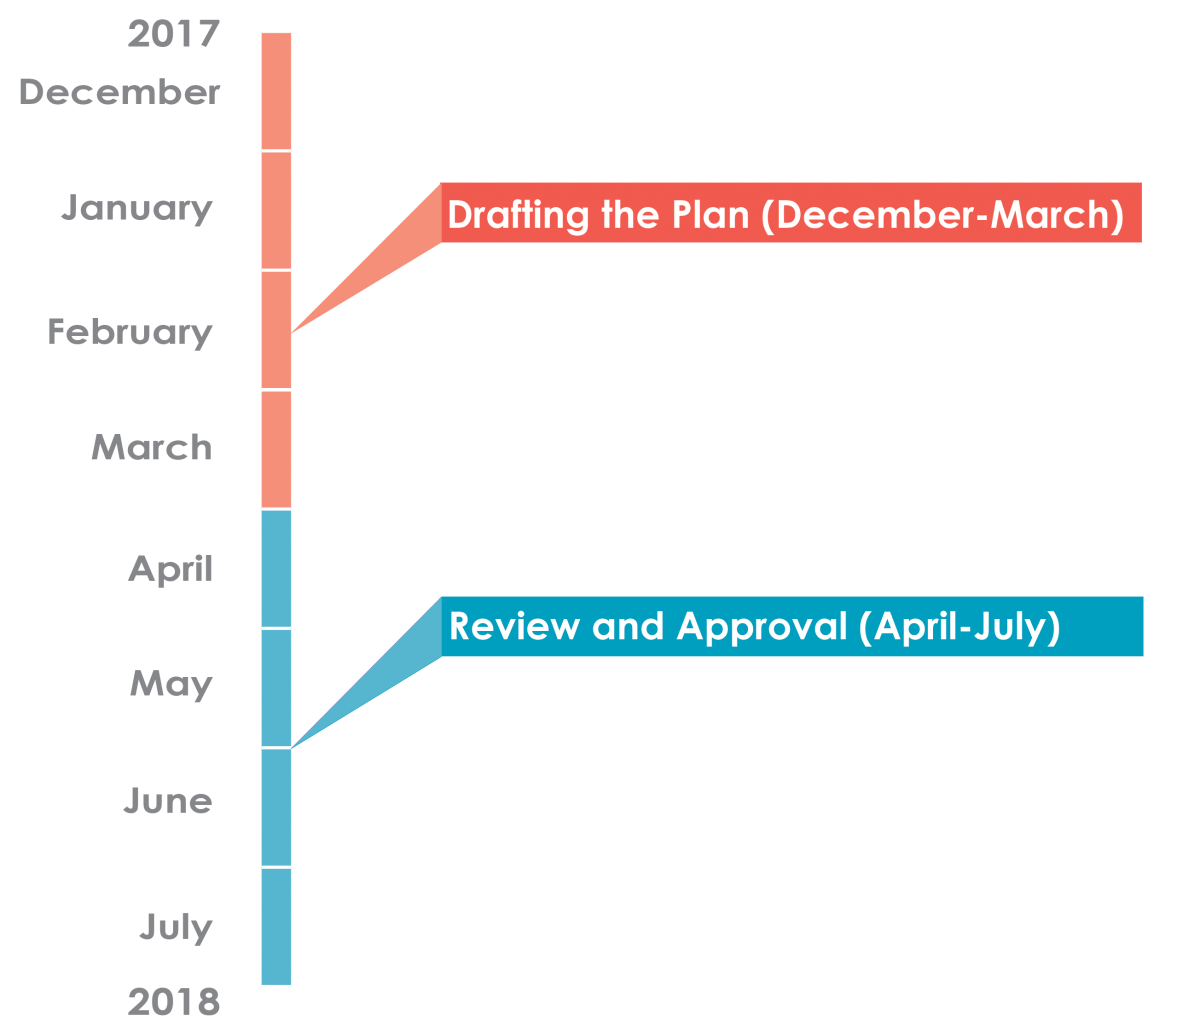 Drafting the plan through April 2018. Review and approval through July 2018